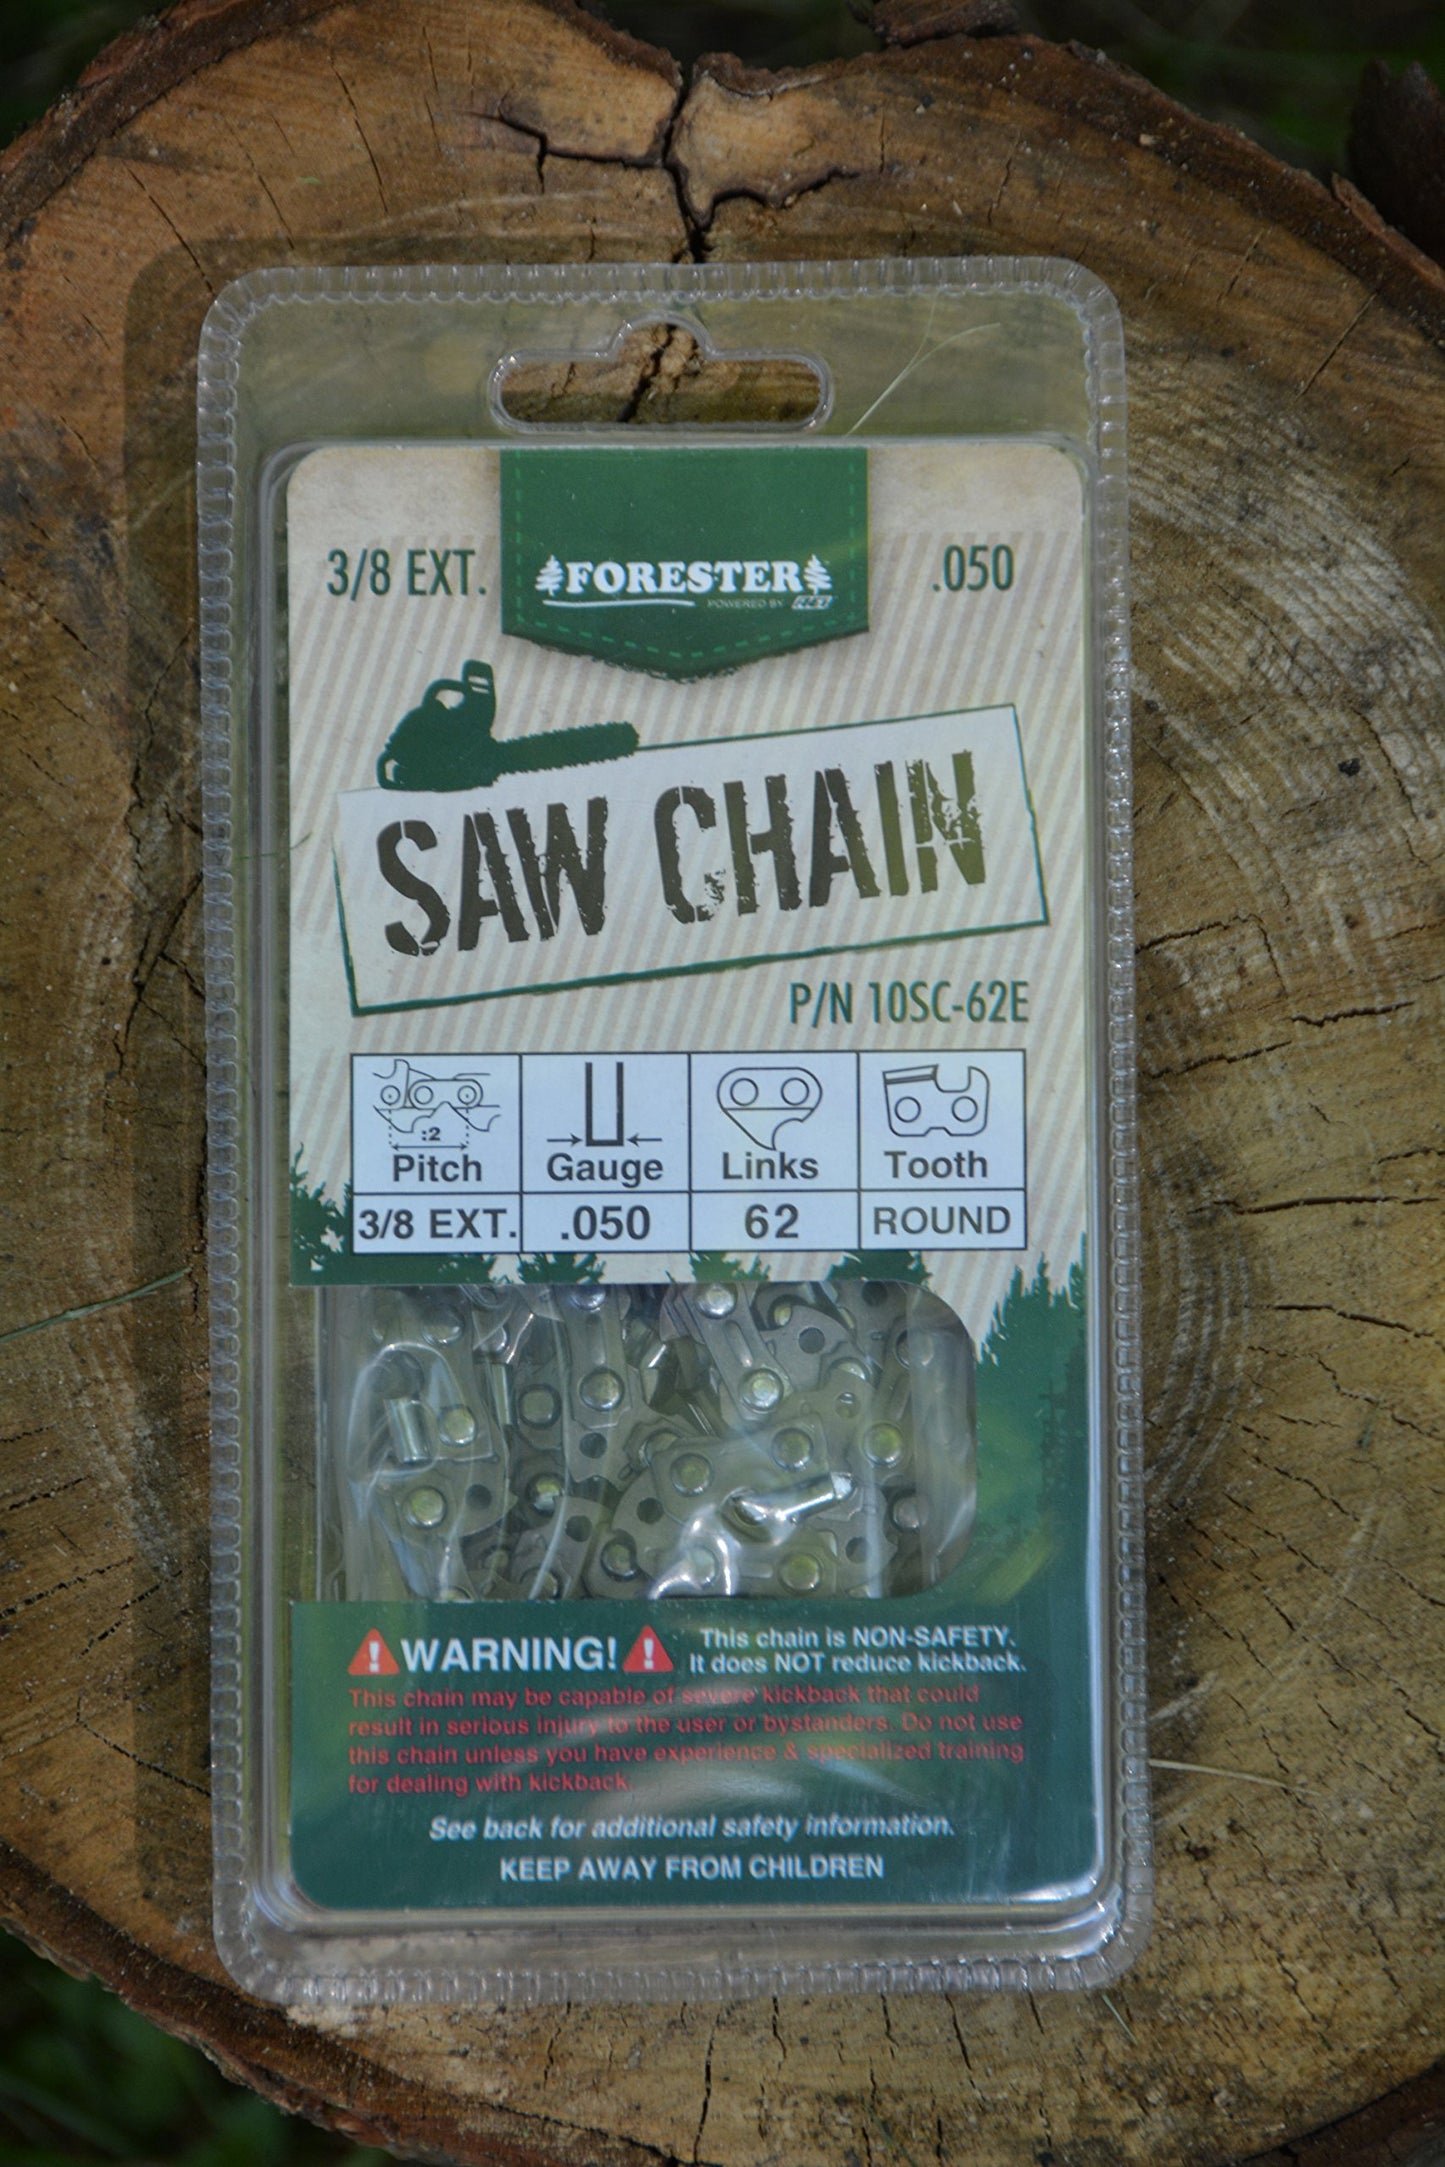 FORESTER Chainsaw Chain 10SC-62E, 18 inch Saw Chain, 62 Drive Links